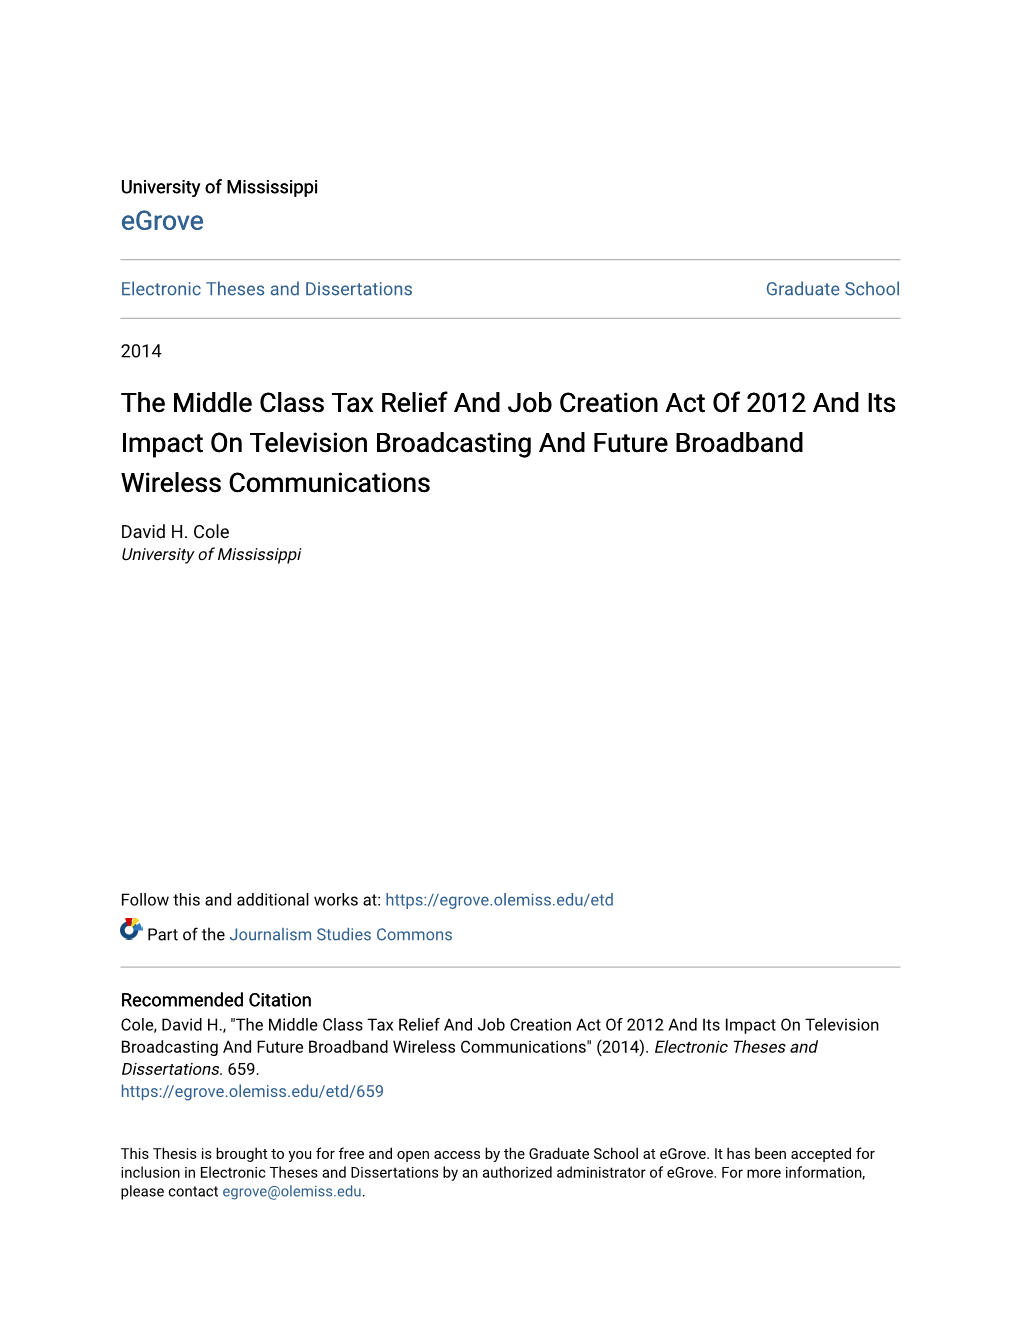 The Middle Class Tax Relief and Job Creation Act of 2012 and Its Impact on Television Broadcasting and Future Broadband Wireless Communications